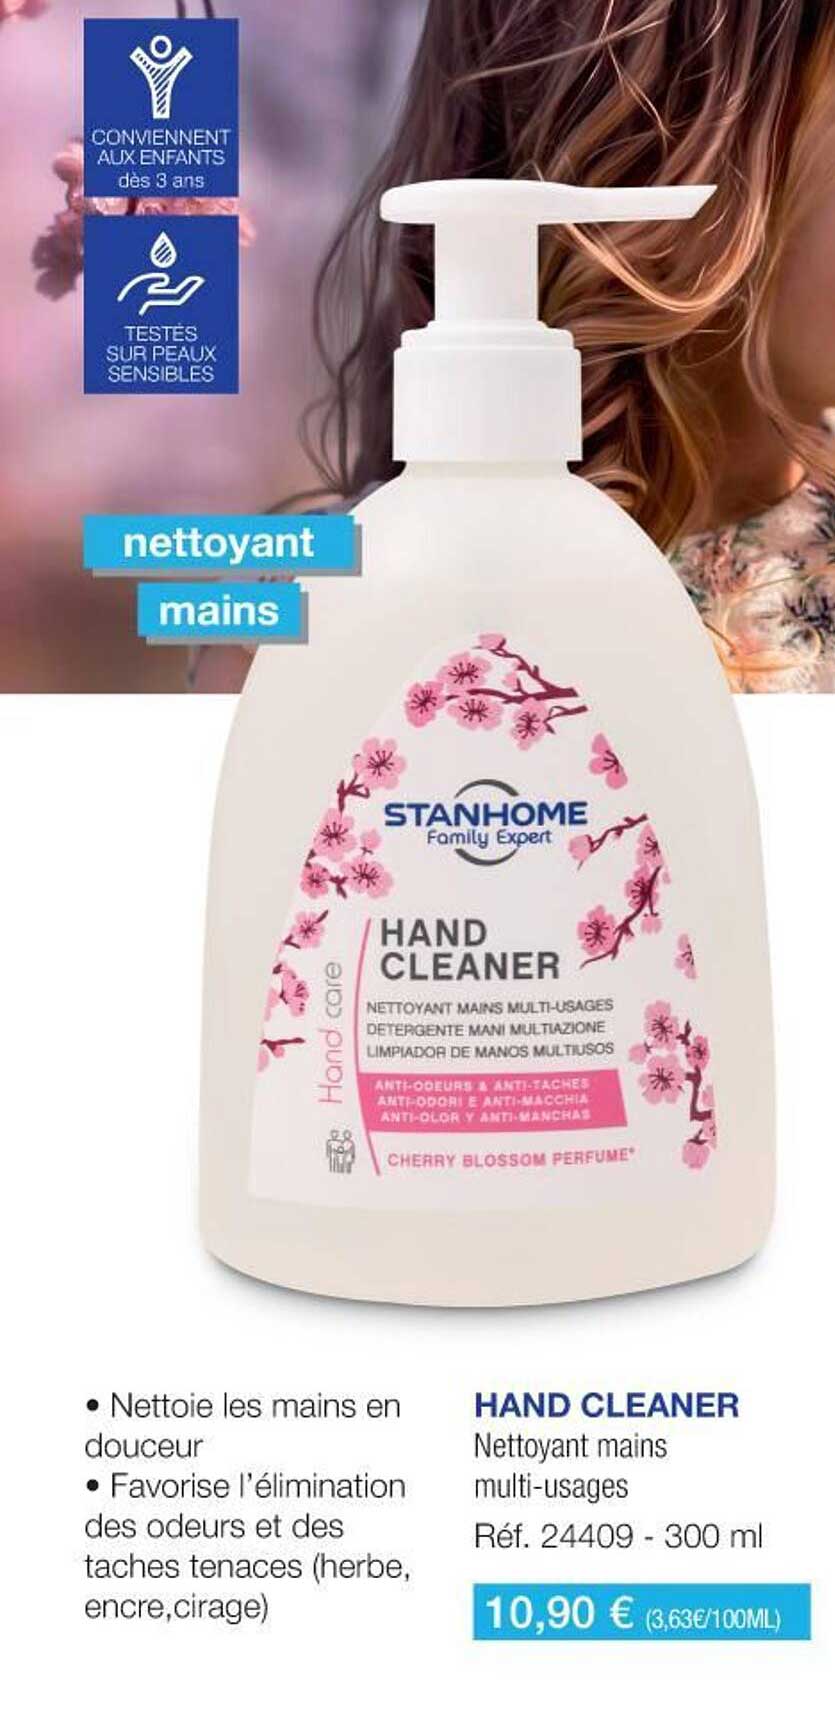 HAND CLEANER STANHOME